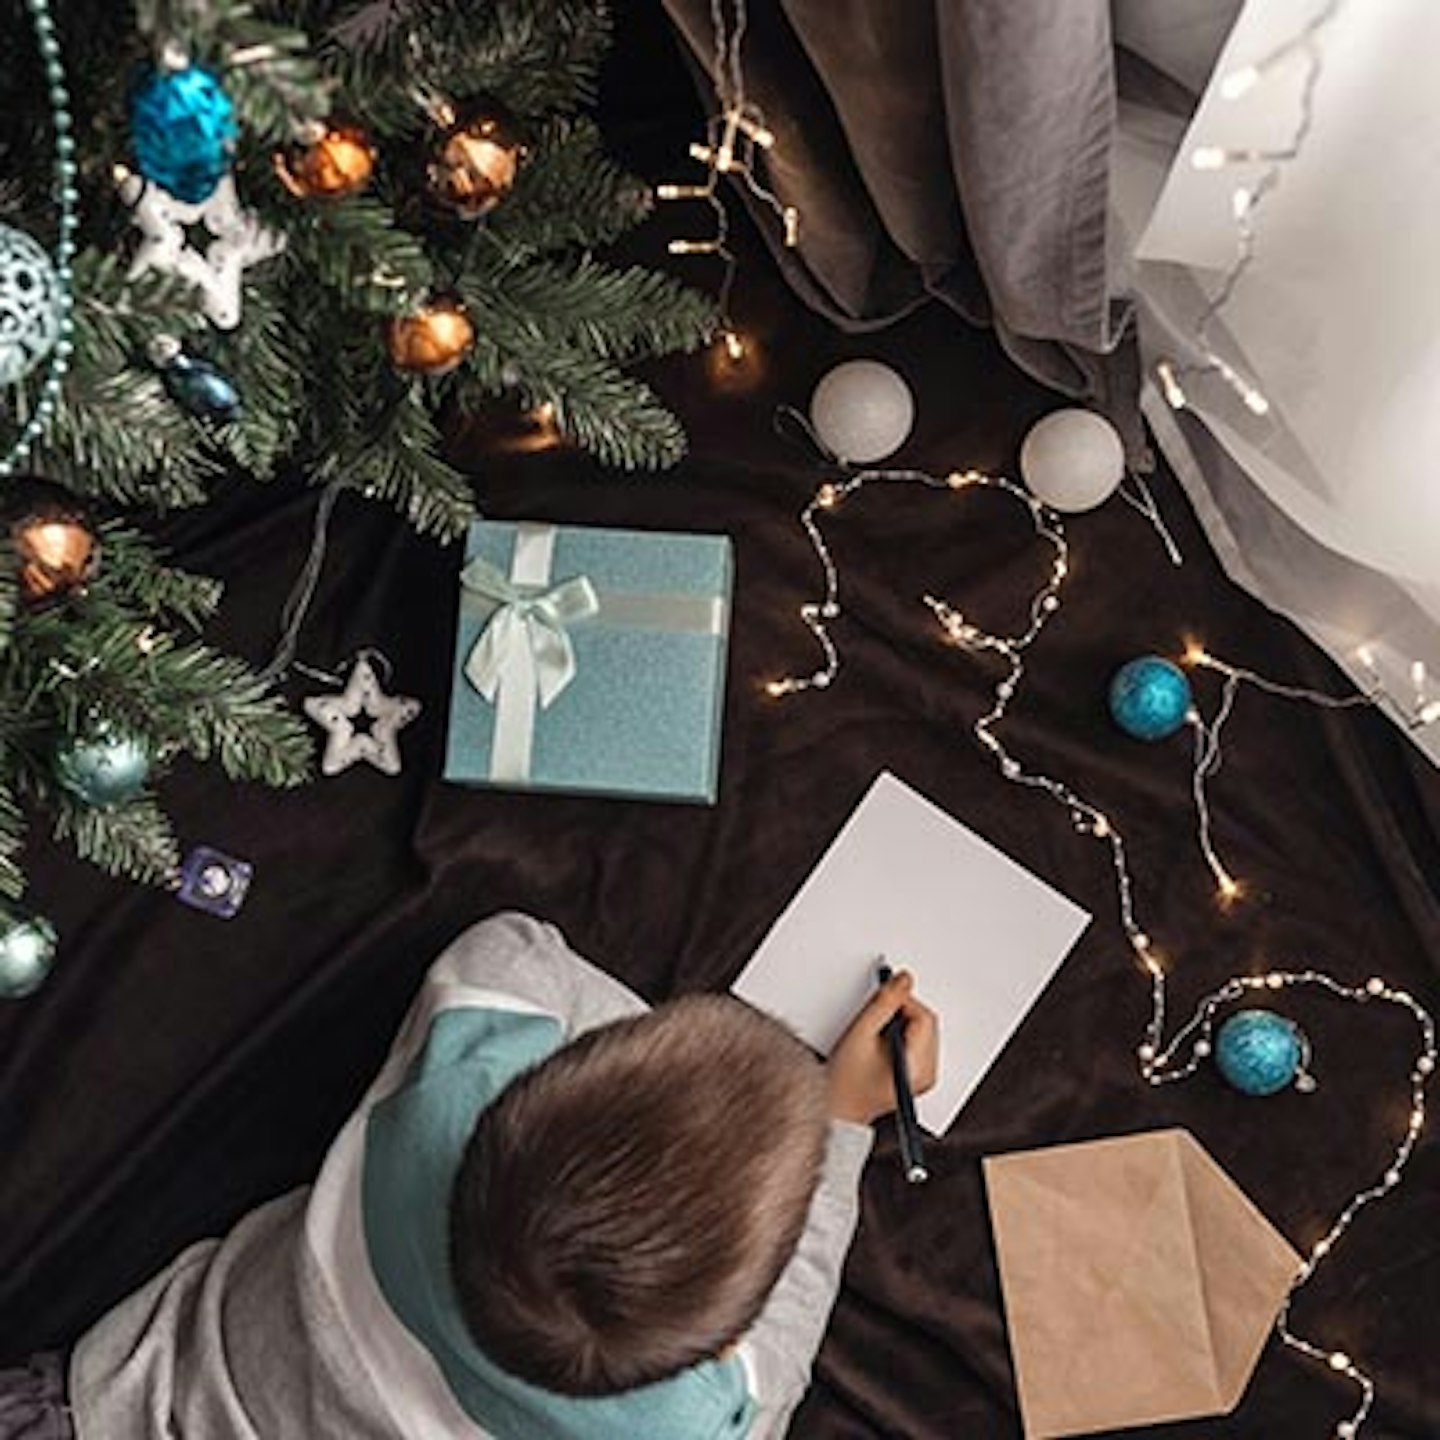 Child writing a festive letter